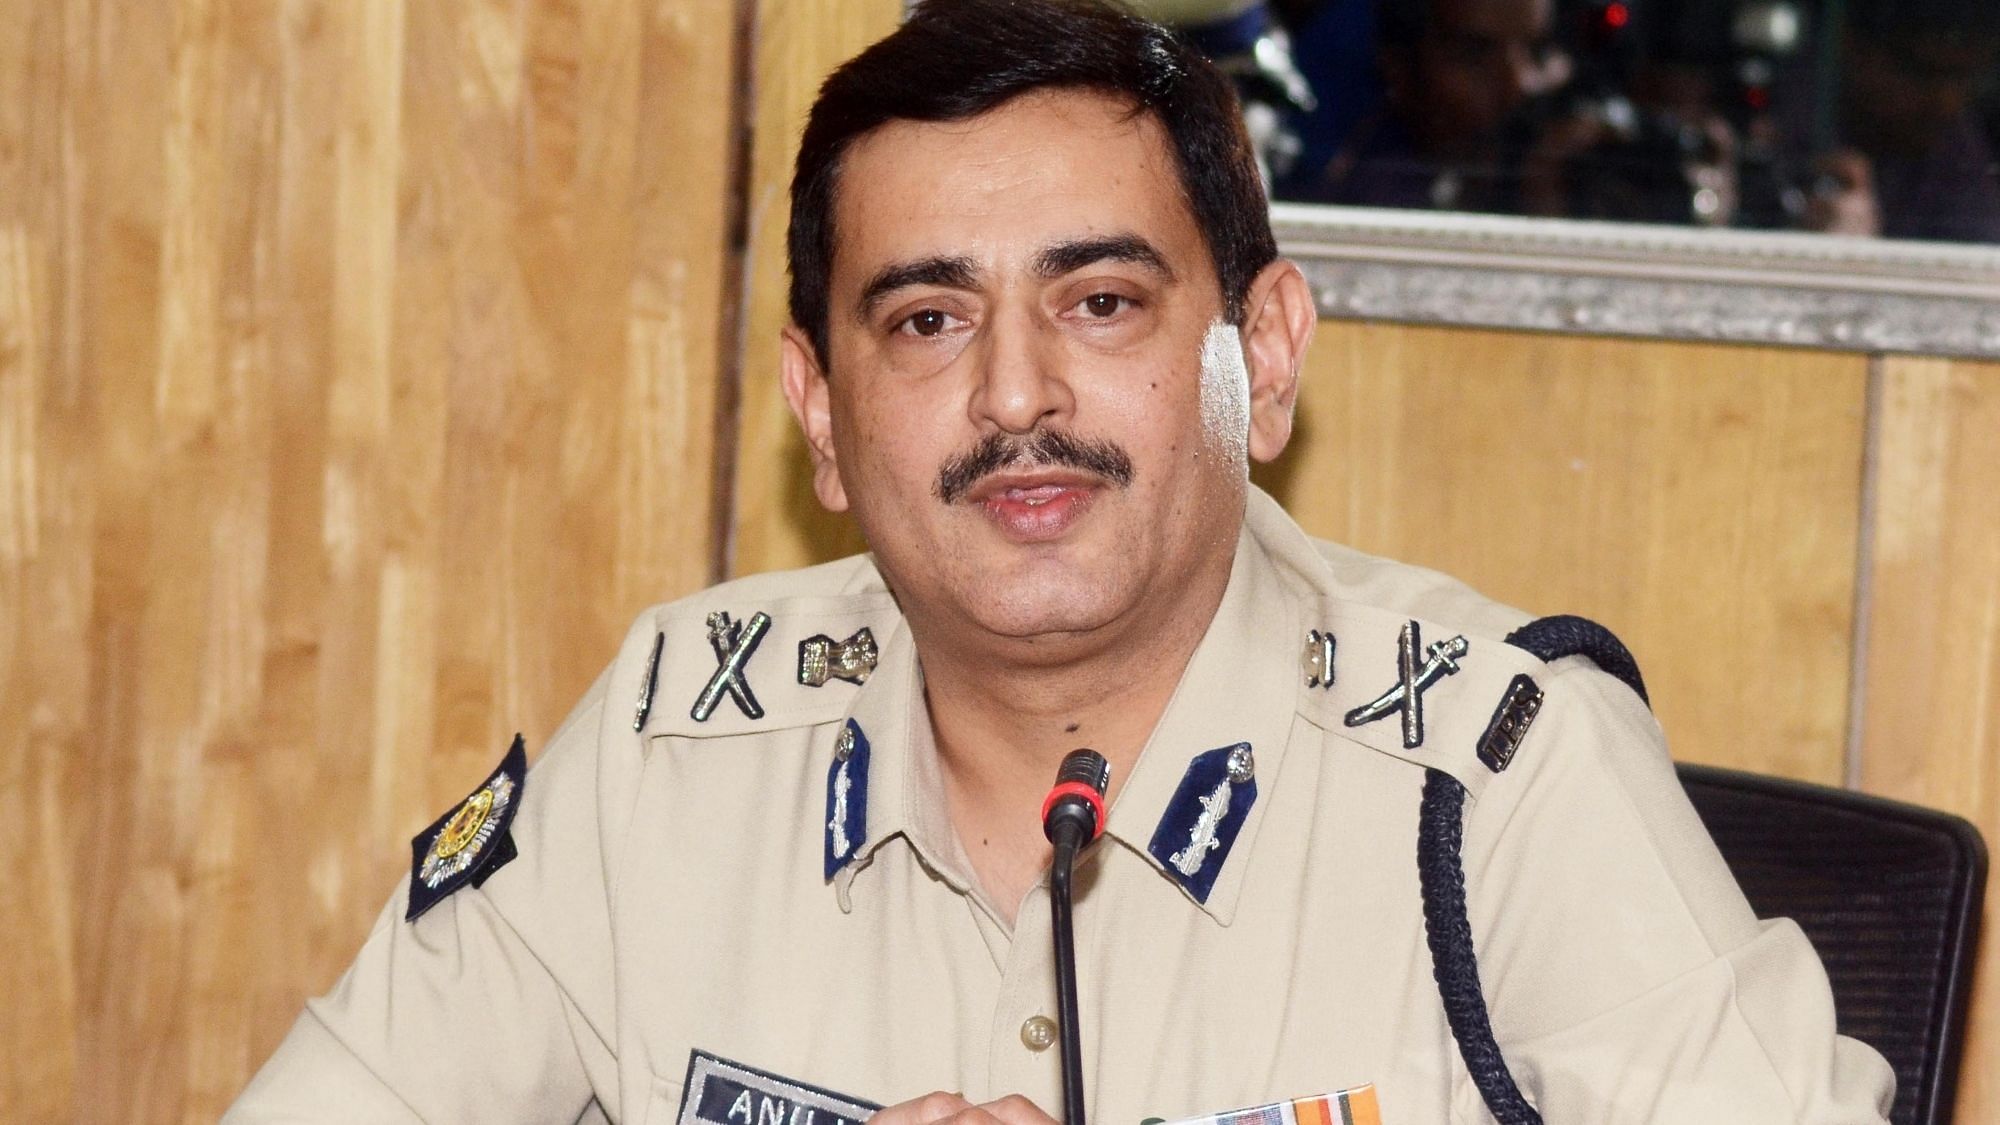 File photo of Kolkata Police Commissioner Anuj Sharma who was also replaced by the Election Commission.